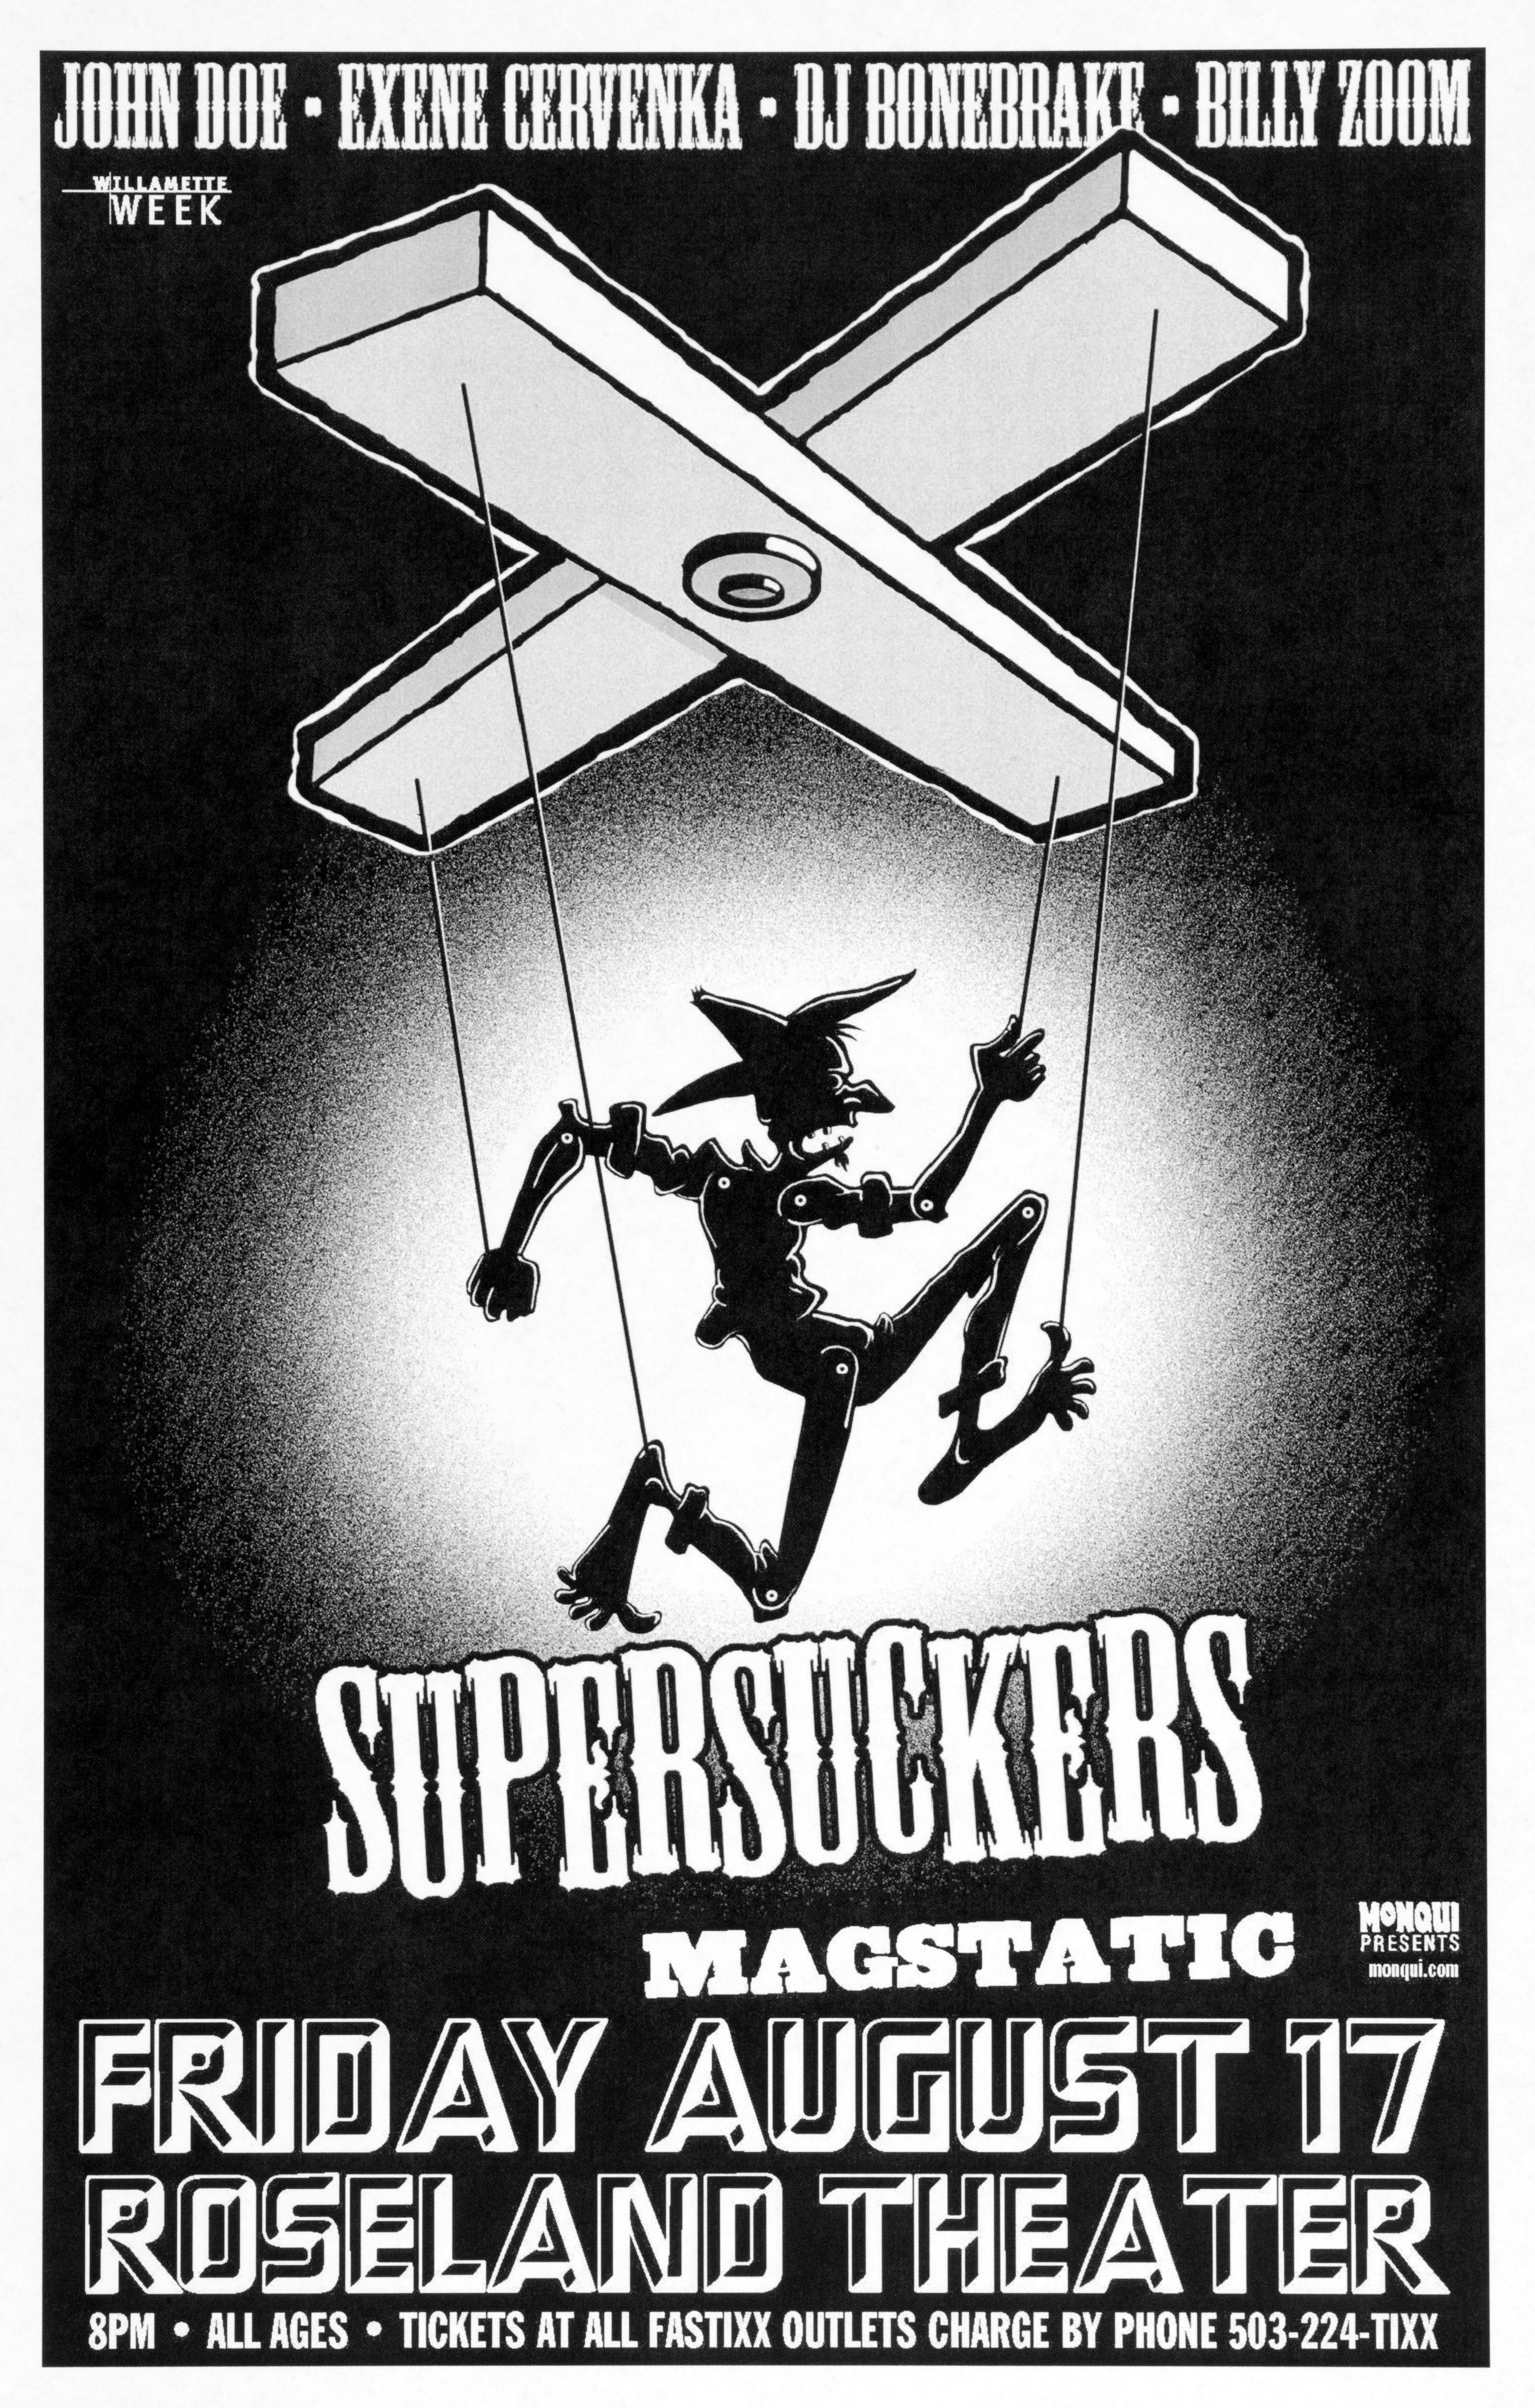 MXP-144.1 X & Supersuckers at Roseland Theater 2001 Concert Poster